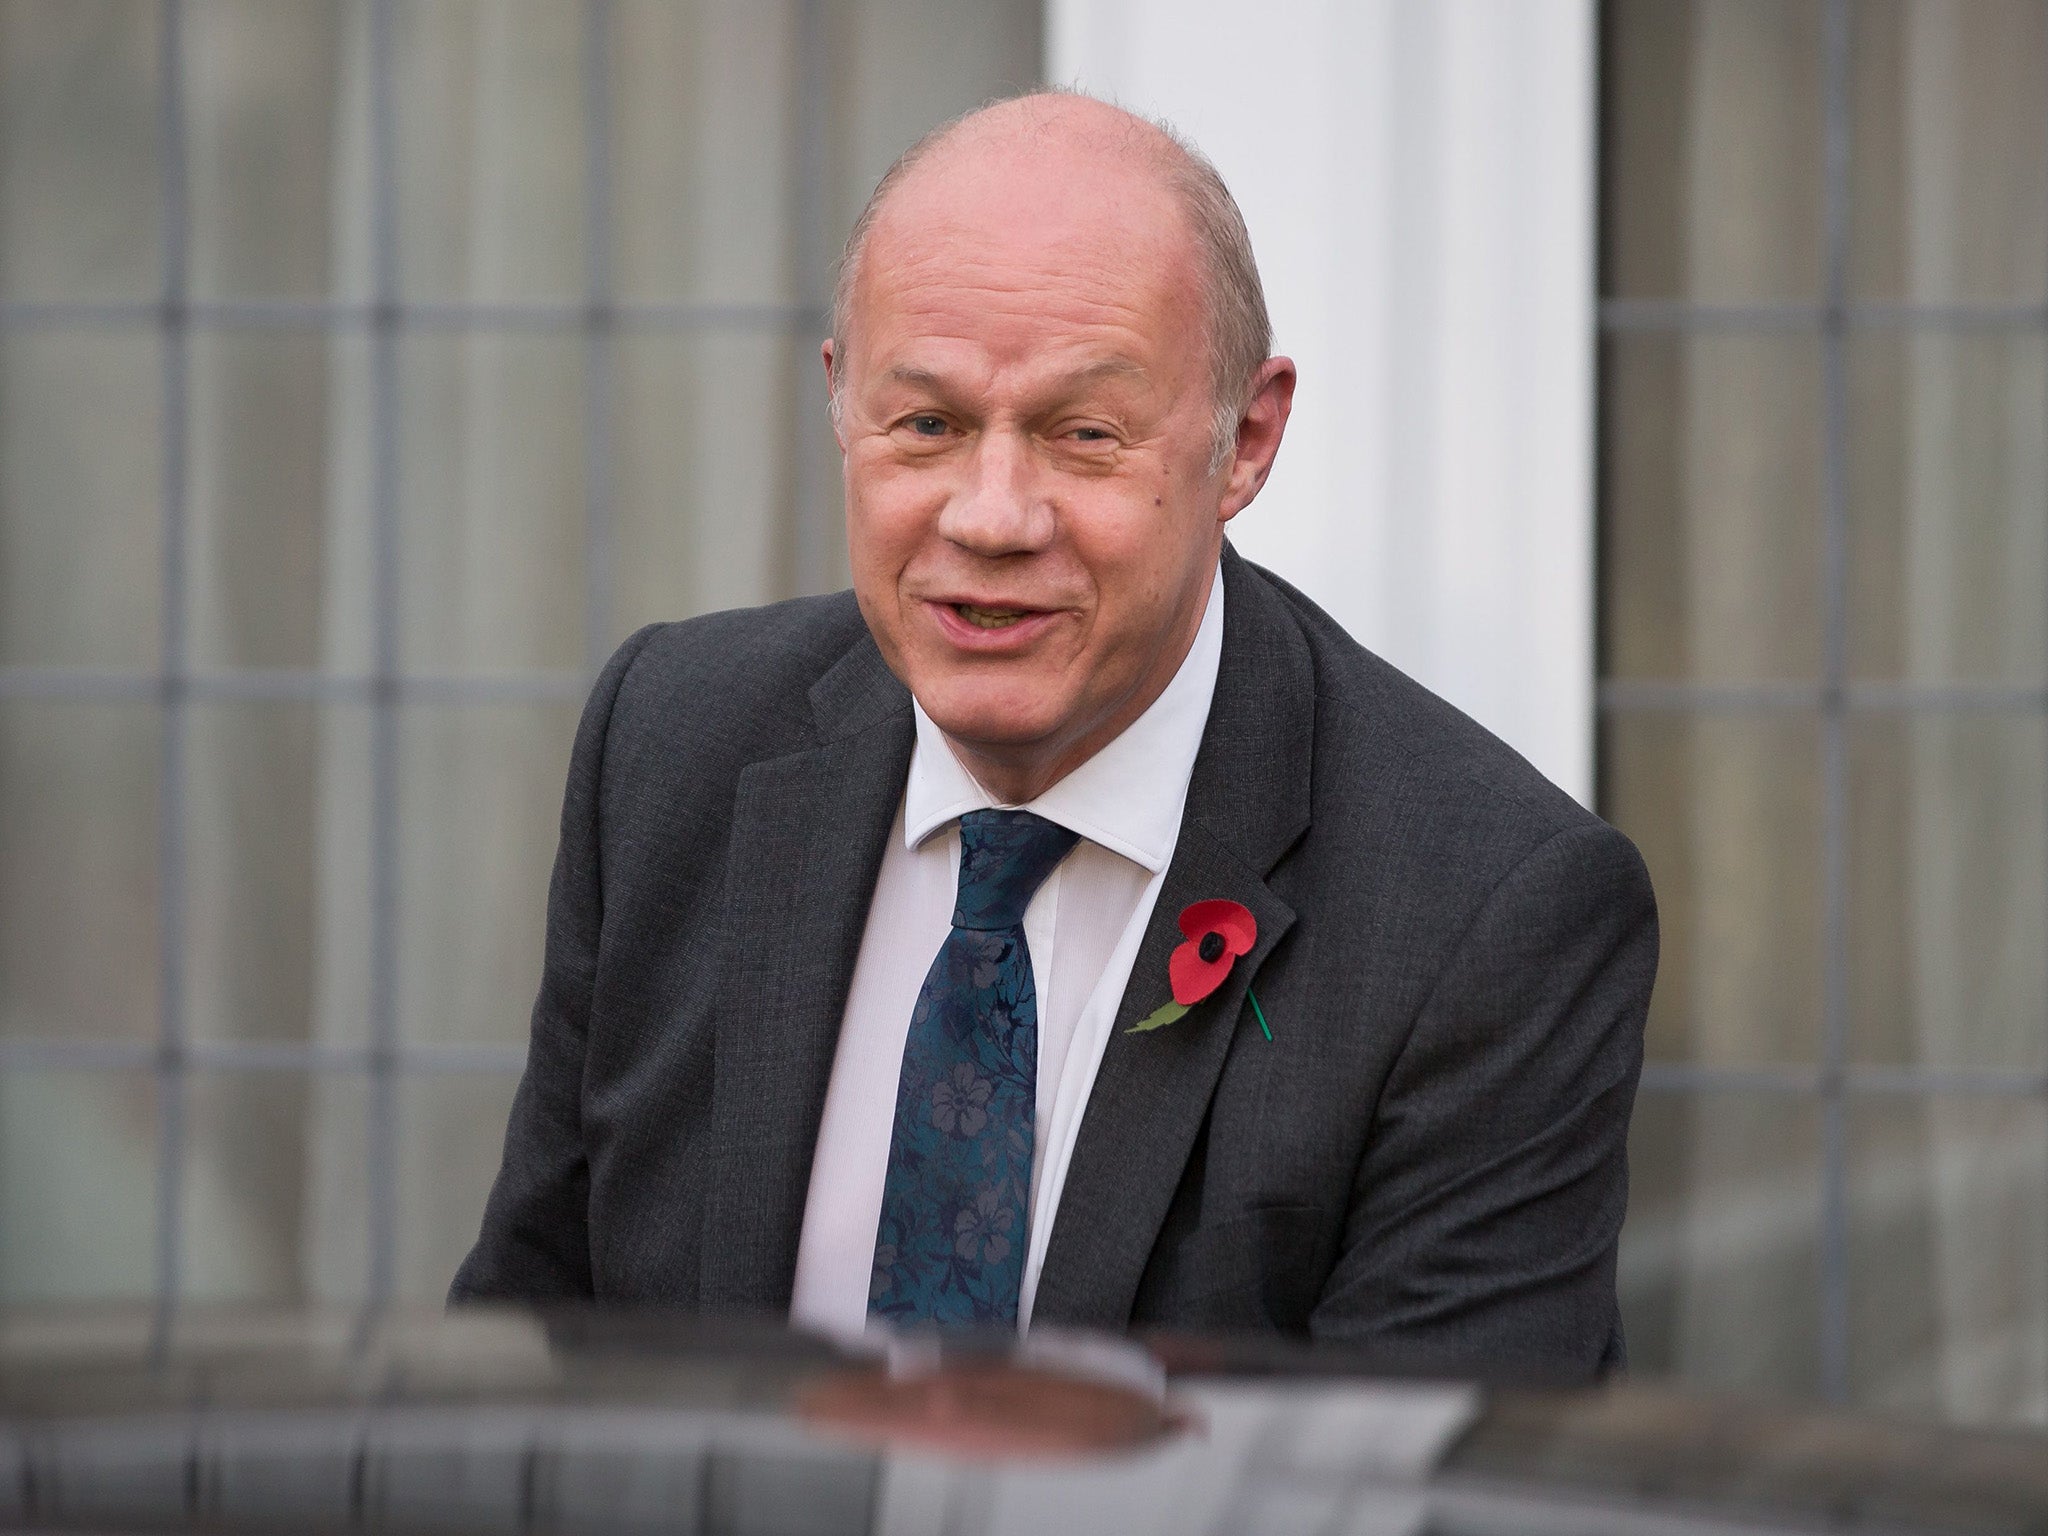 Damian Green has strongly denied the claims